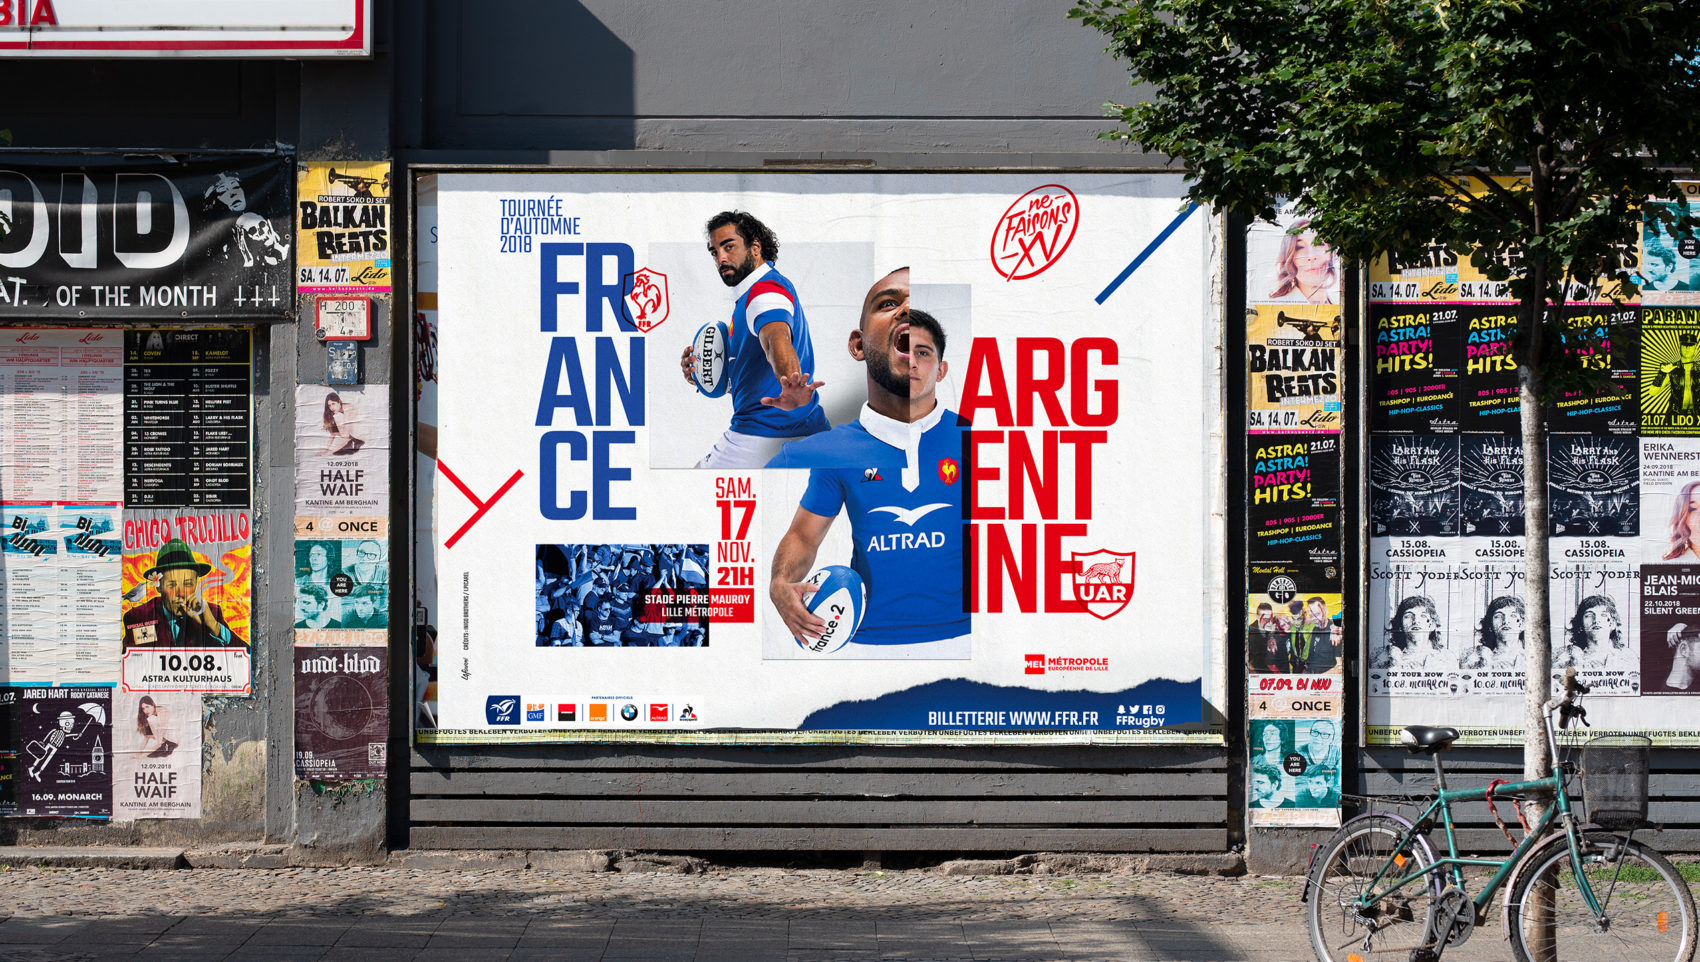 Projet_FFR_CAMPAGNE_#NEFAISONSXV_equipes_de_France_federation_francaise_french_rugby